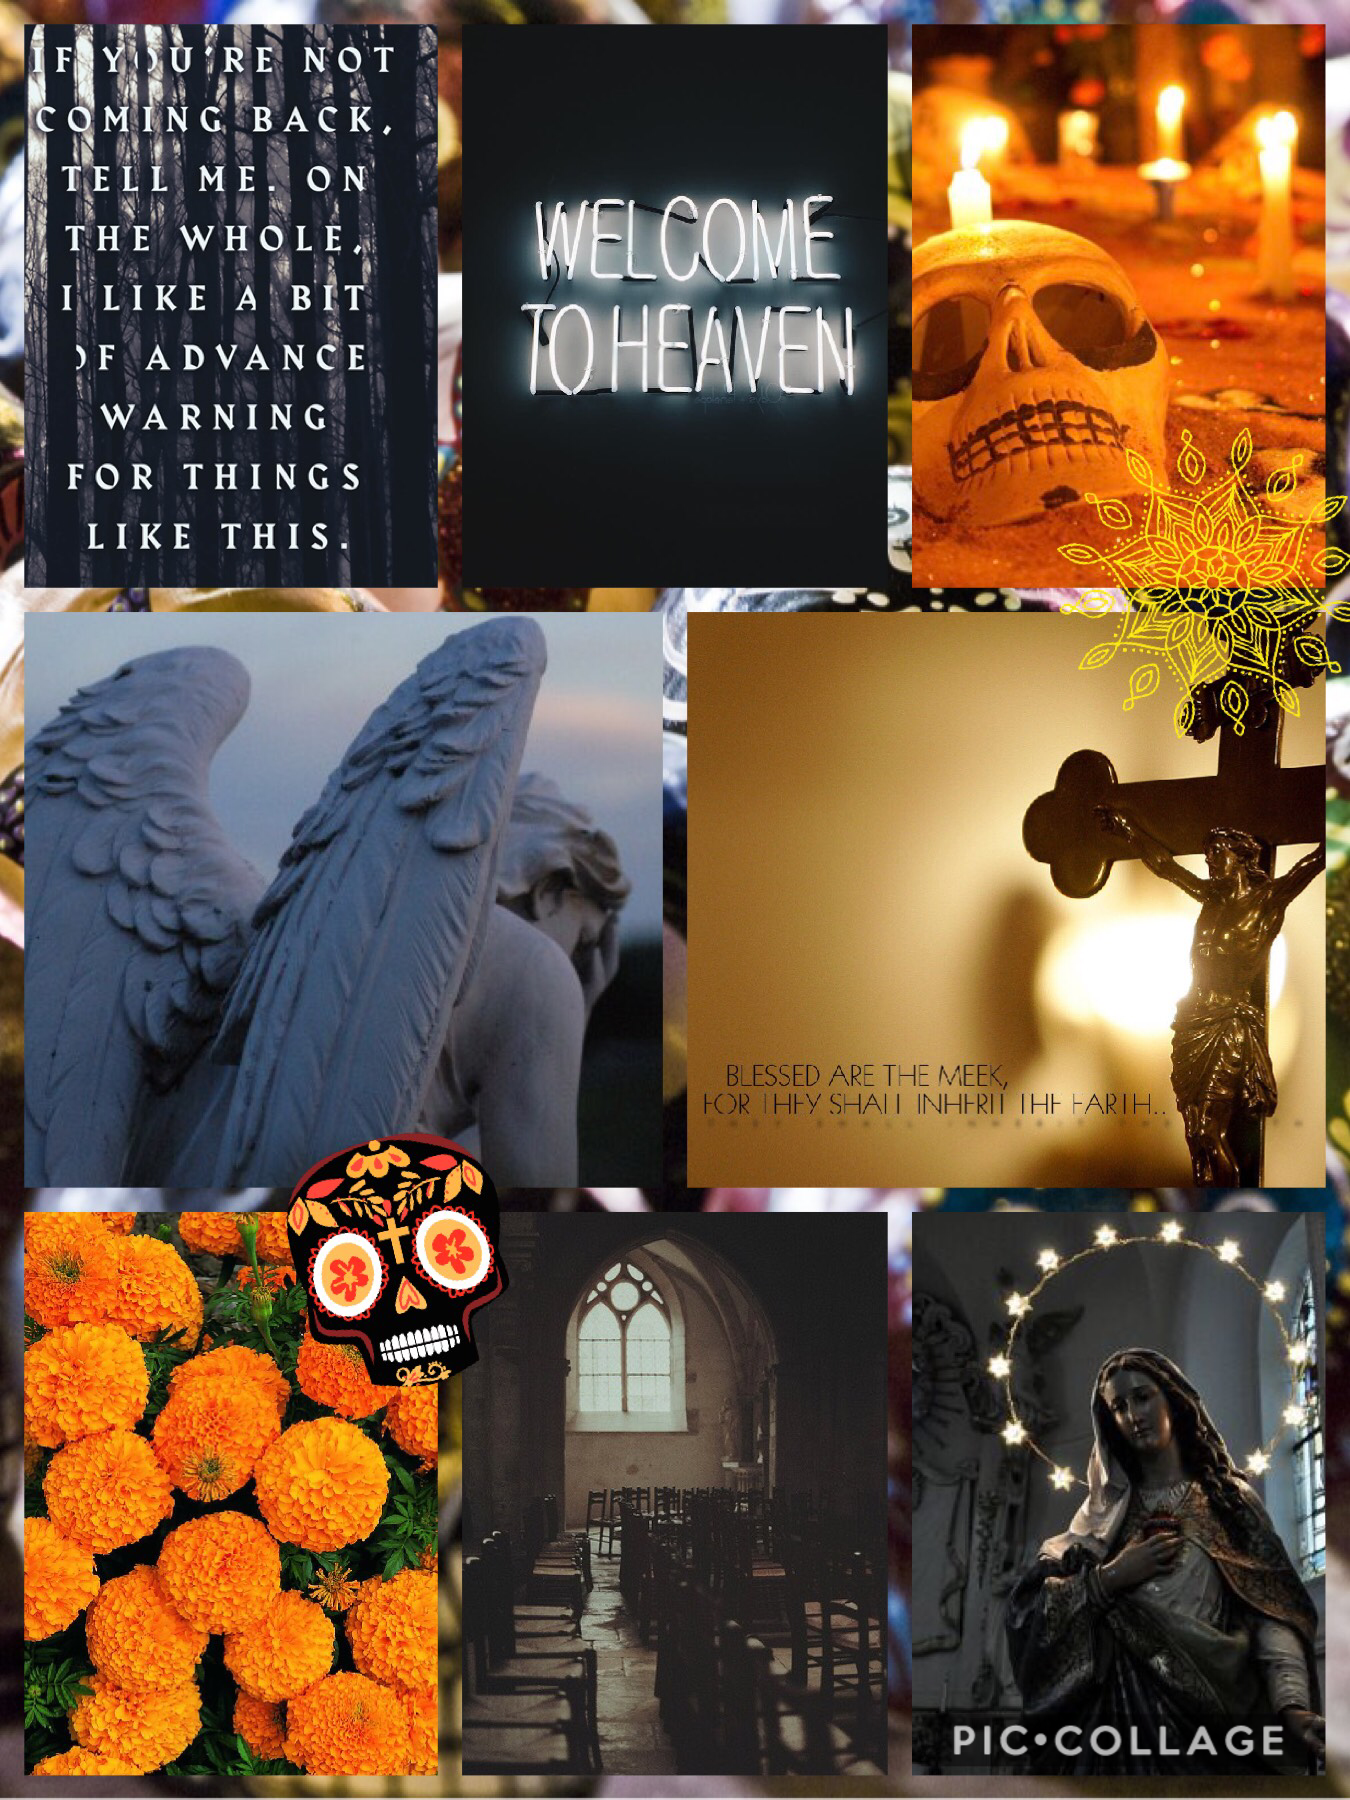 Have a blessed All Saints Day/Day of the Dead.